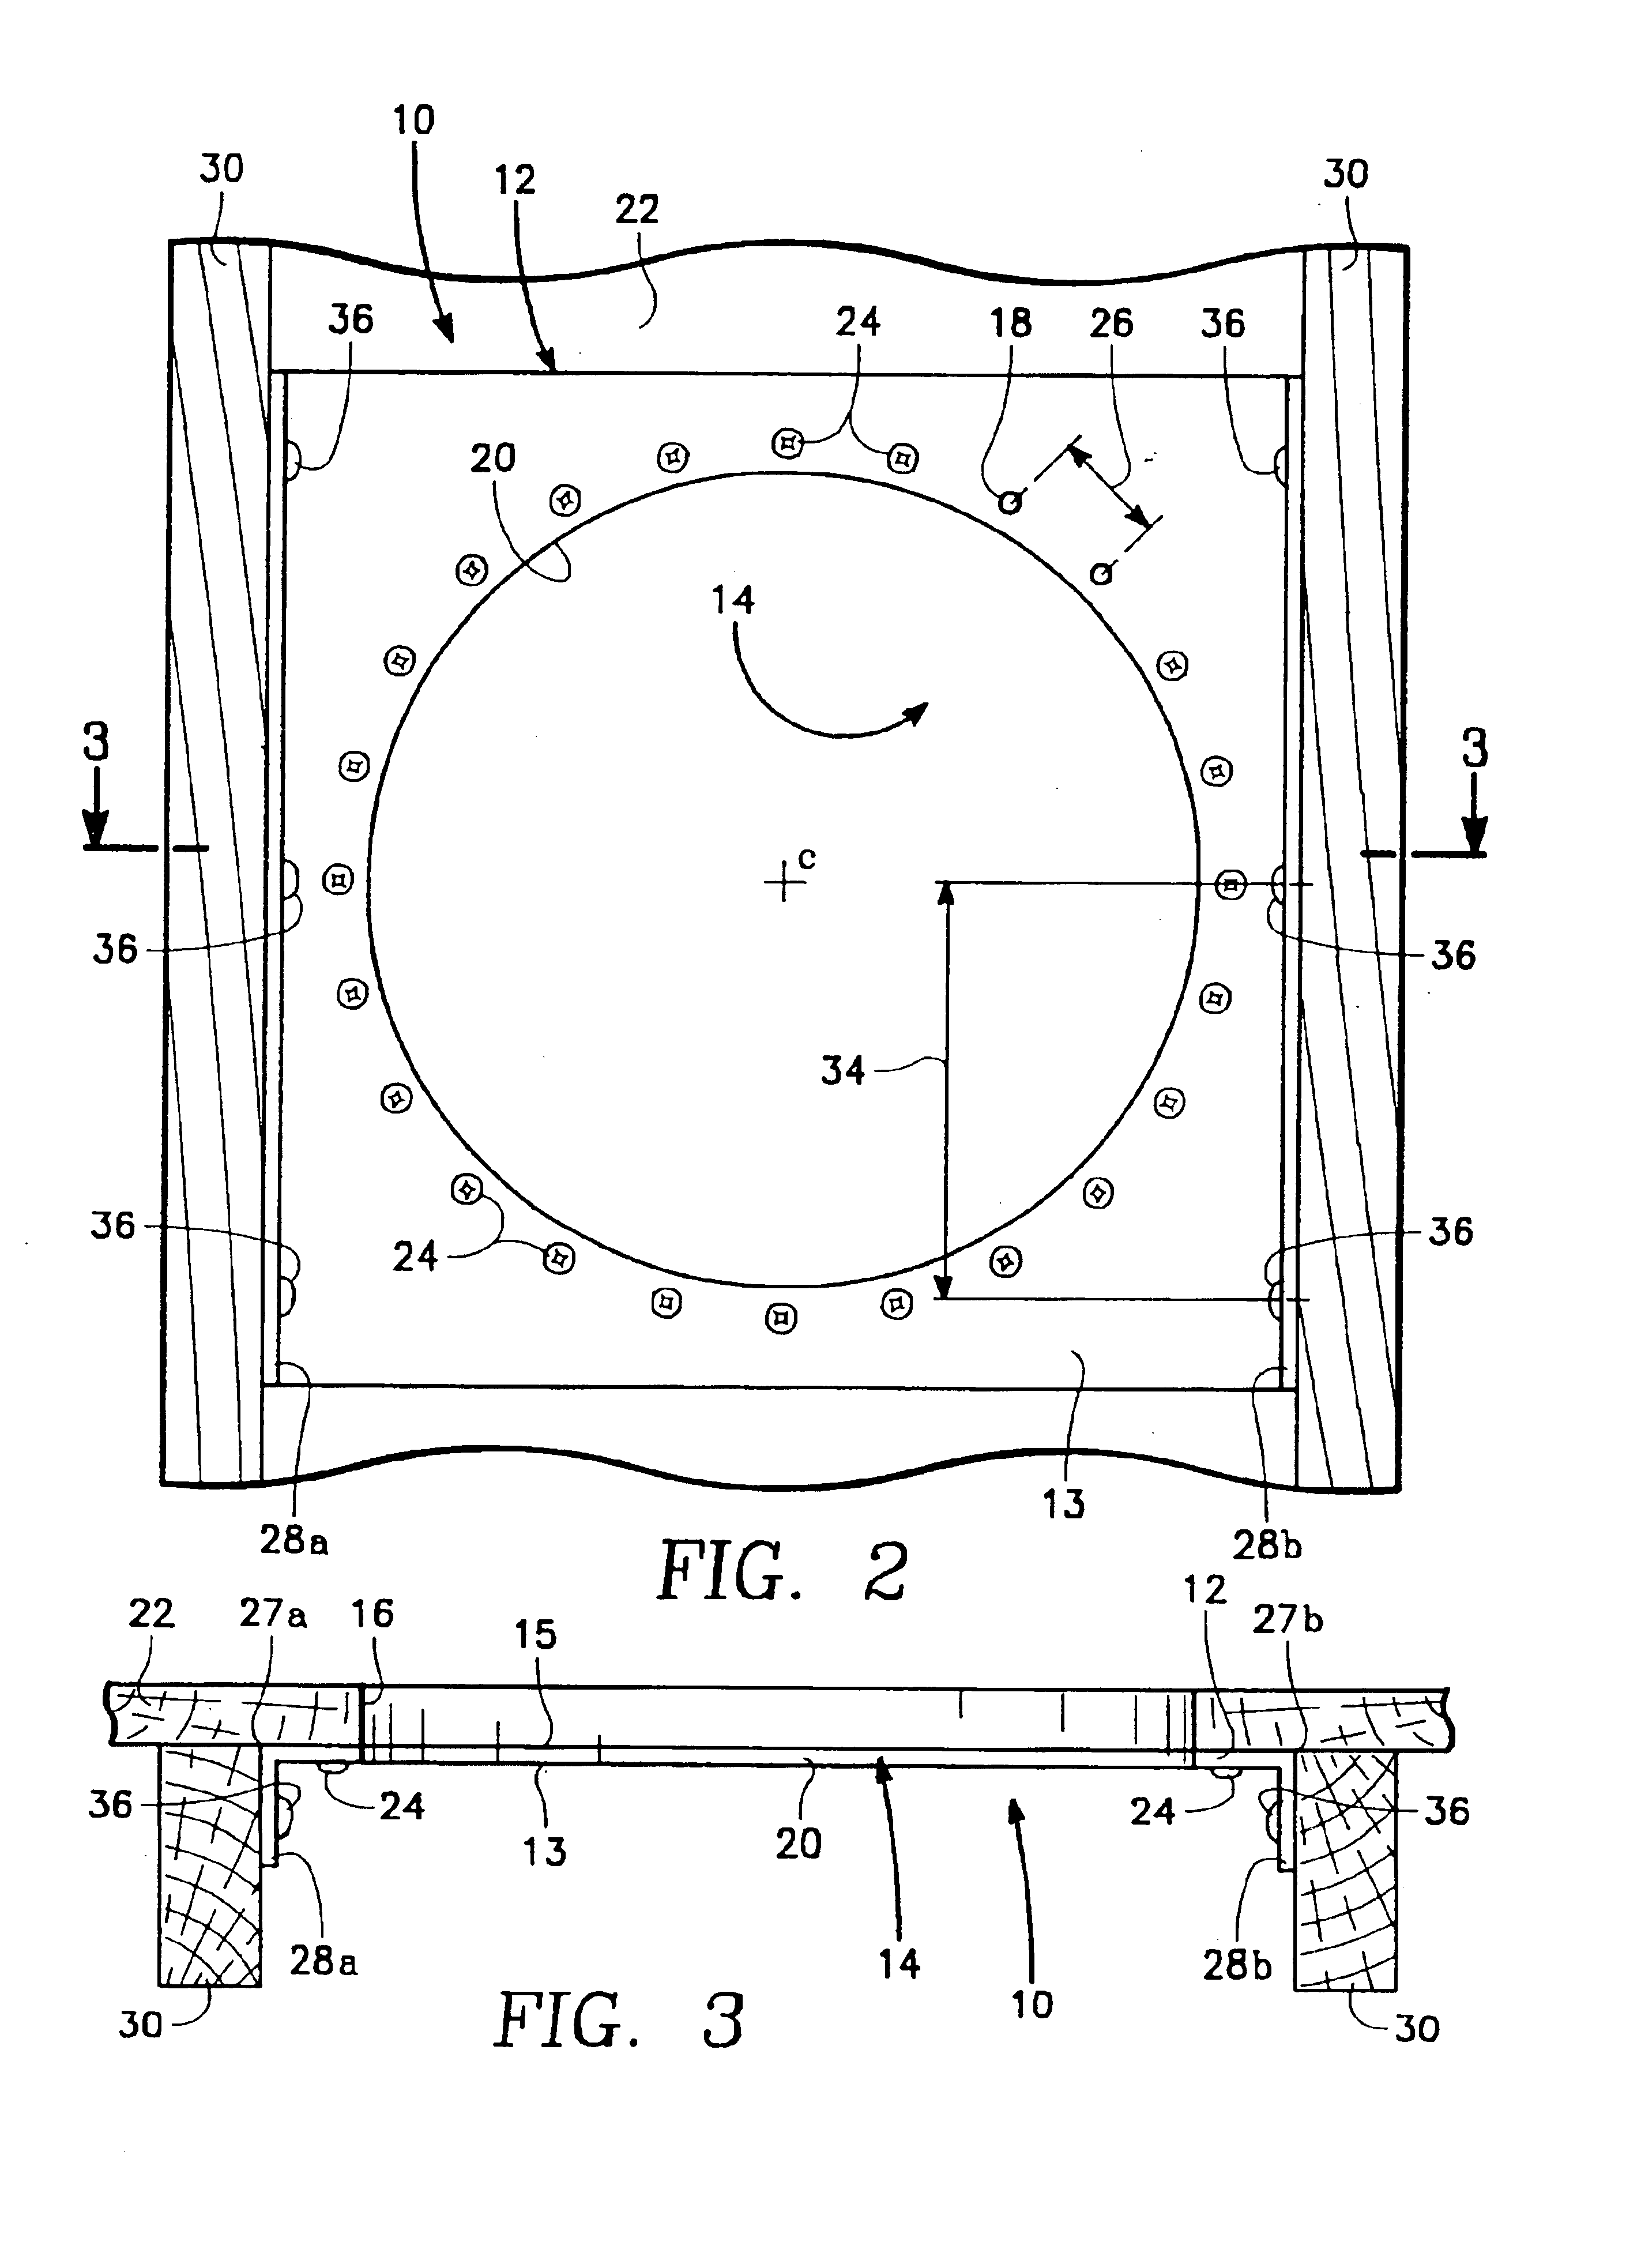 Reinforcement plate for a structural member